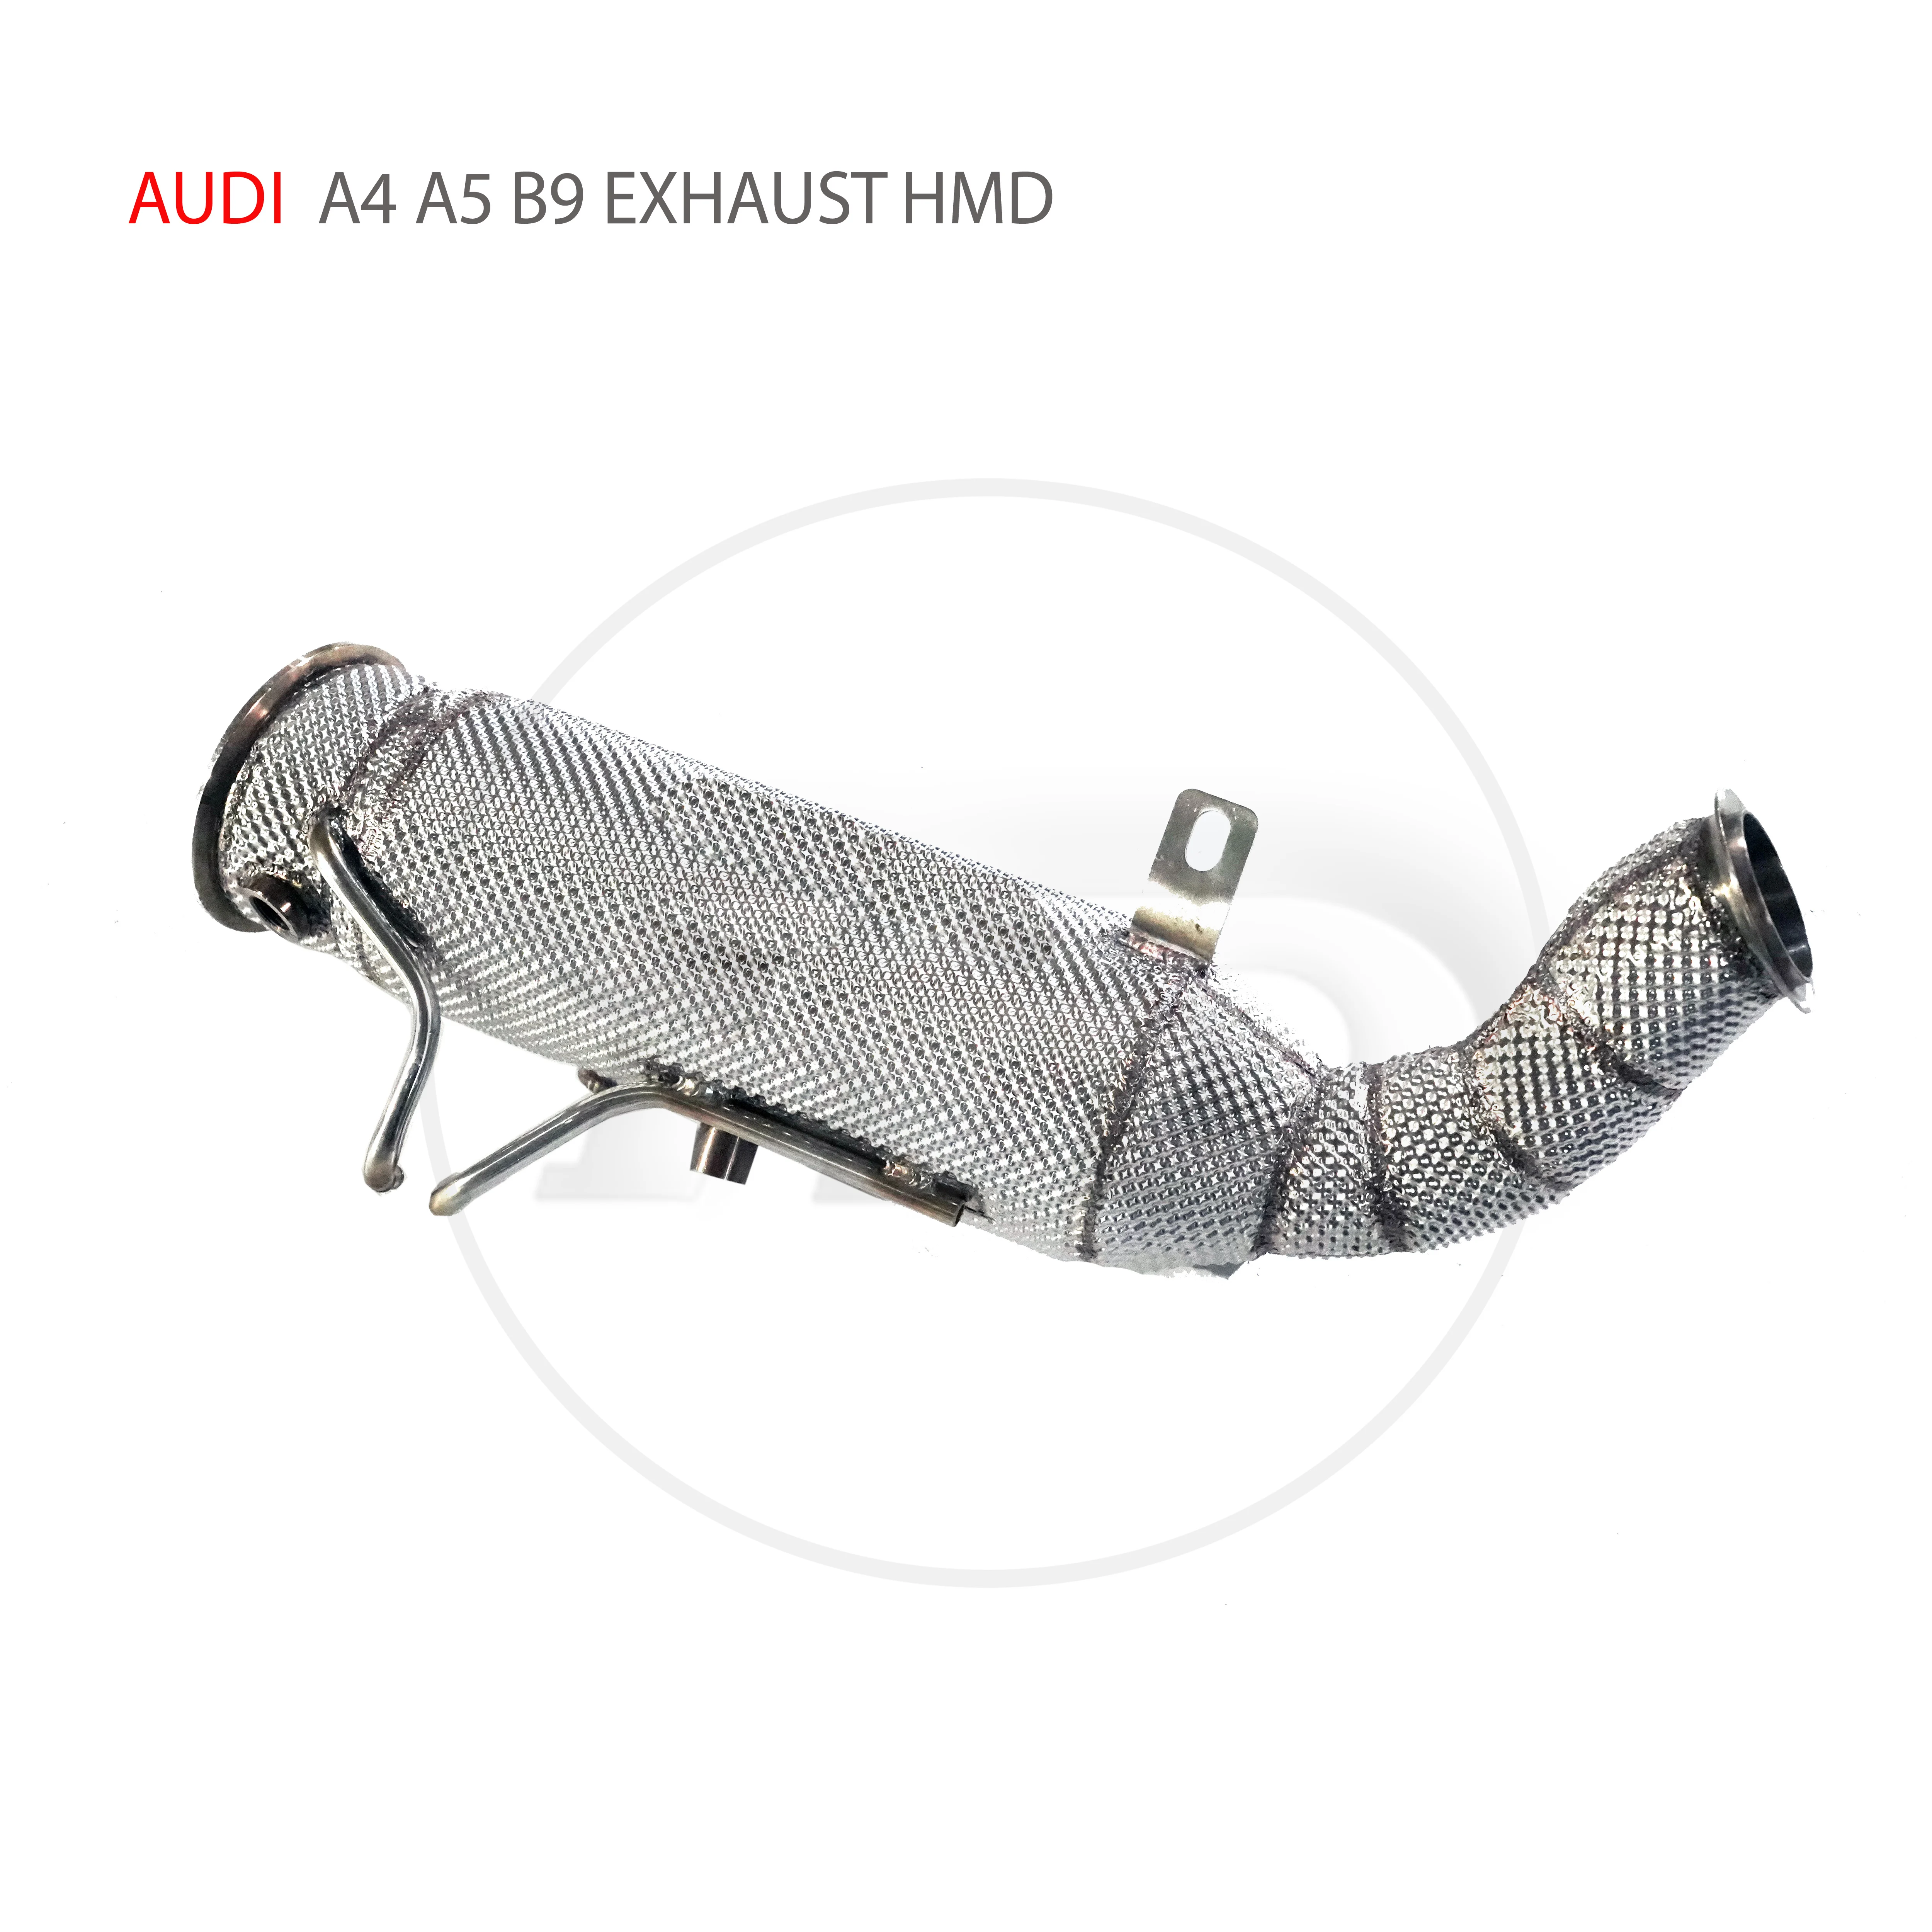 

HMD Stainless Steel Exhaust System High Flow Performance Downpipe For Audi A4 A5 B9